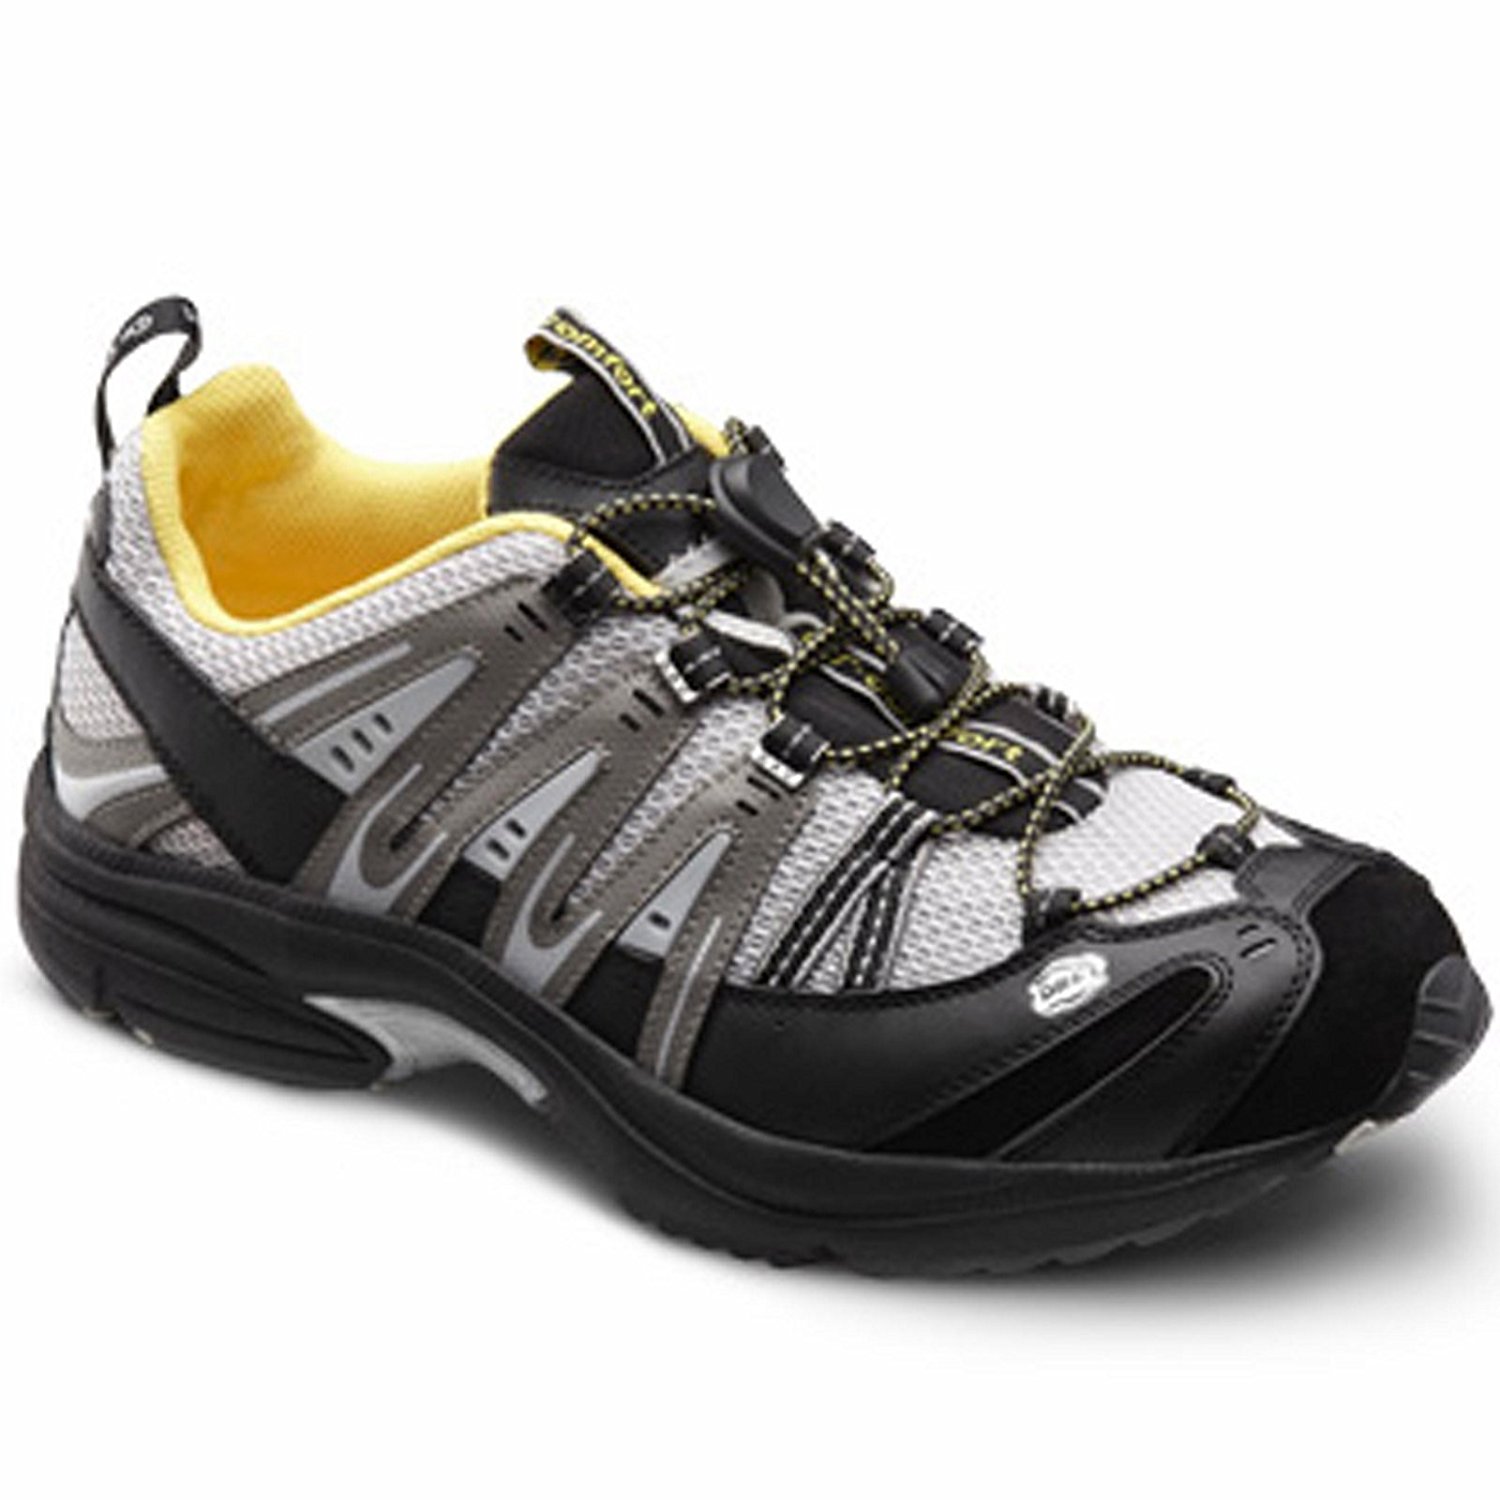 Get A Foot Friend Comfort Shoe-makes easy to walk